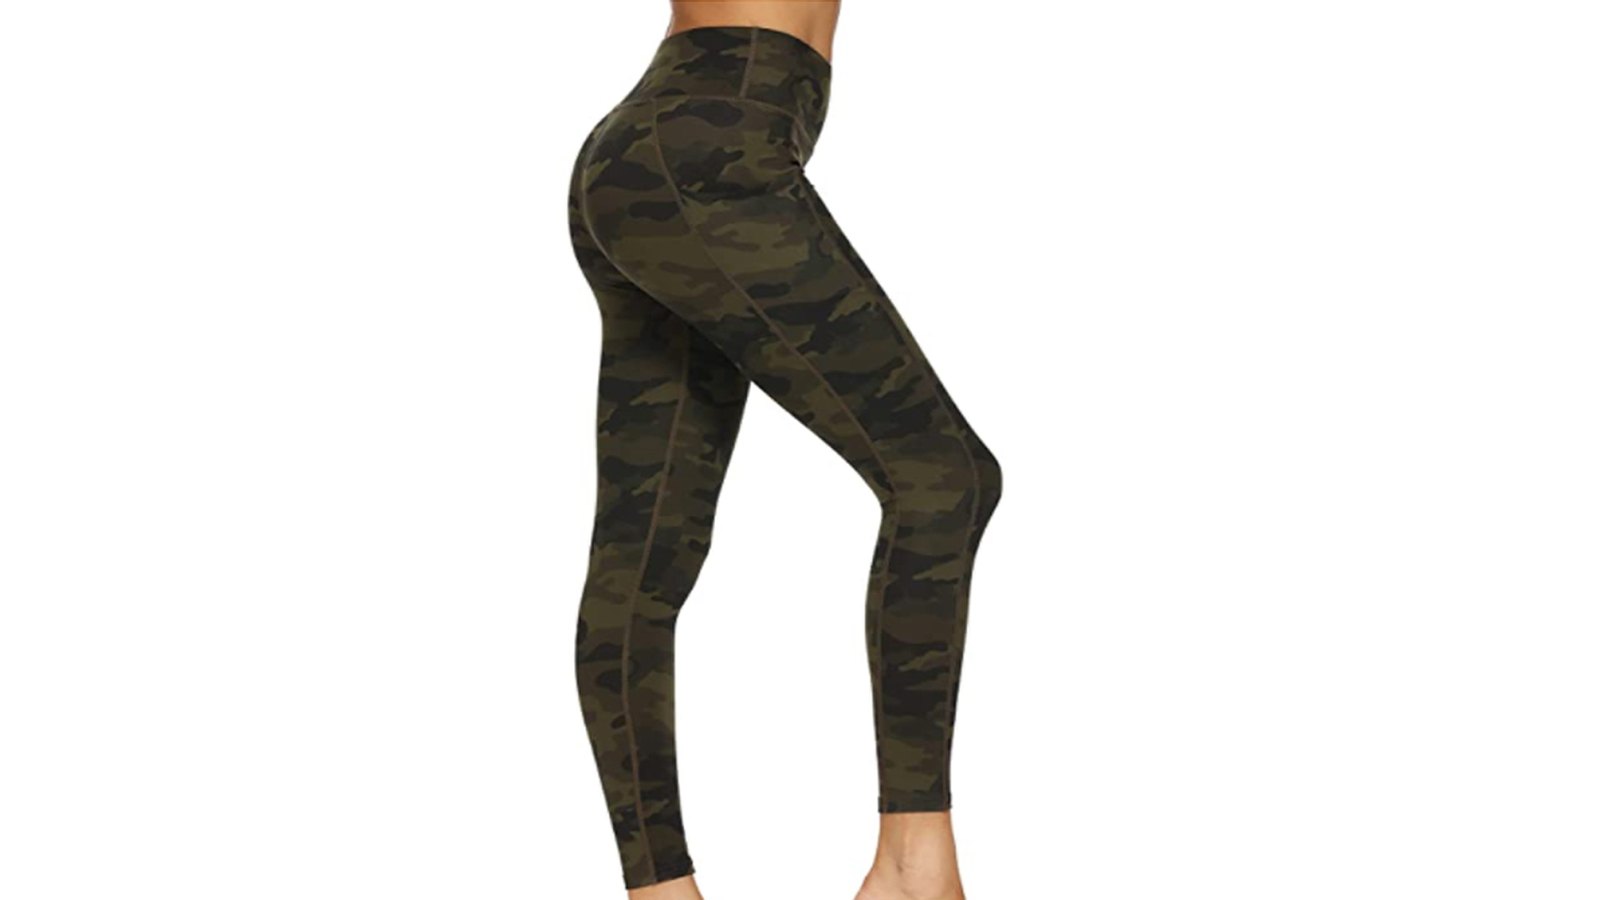 Houmous Buttery Soft Camo Leggings Are Supremely Comfortable | UsWeekly